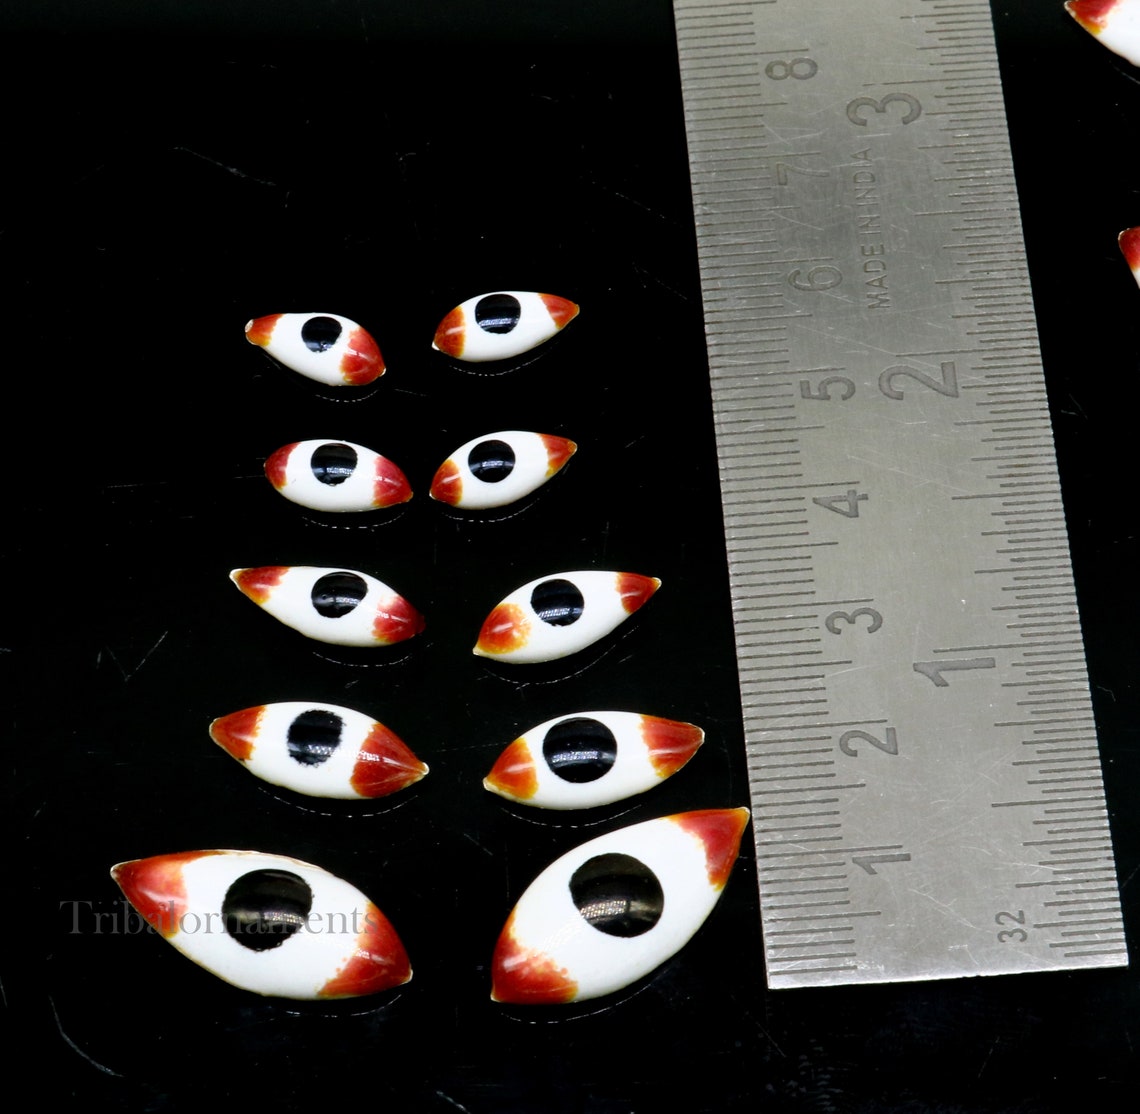 925 sterling silver handmade eyes for statues or sculpture, best eyes for idol statues, deities sculptures, temple articles su560 - TRIBAL ORNAMENTS